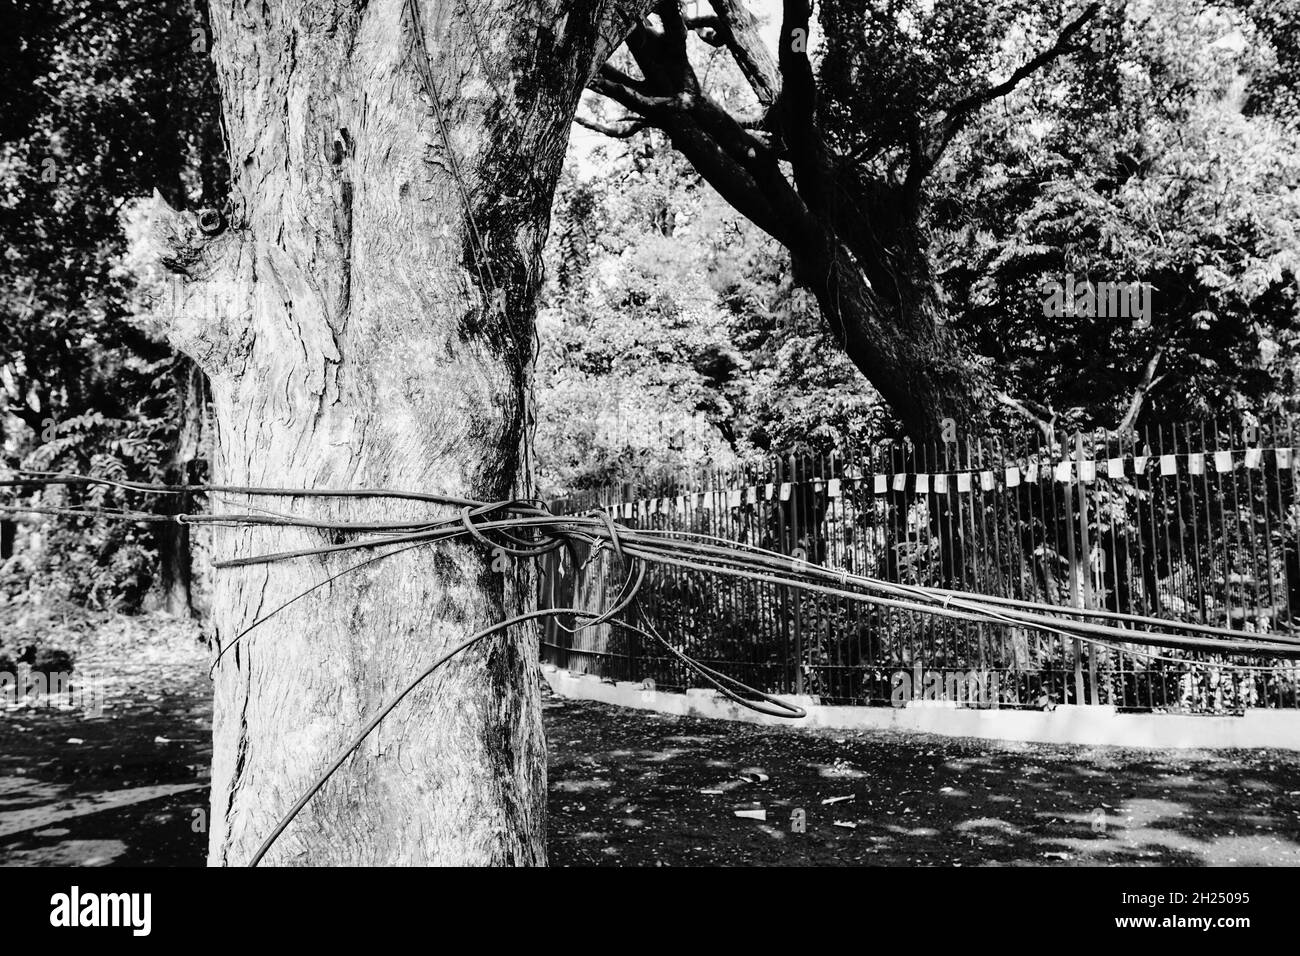 Black and white tree trunk bound with cables and wires. symbolic image of destruction of nature by civilized society. Climate change, threat to natura Stock Photo